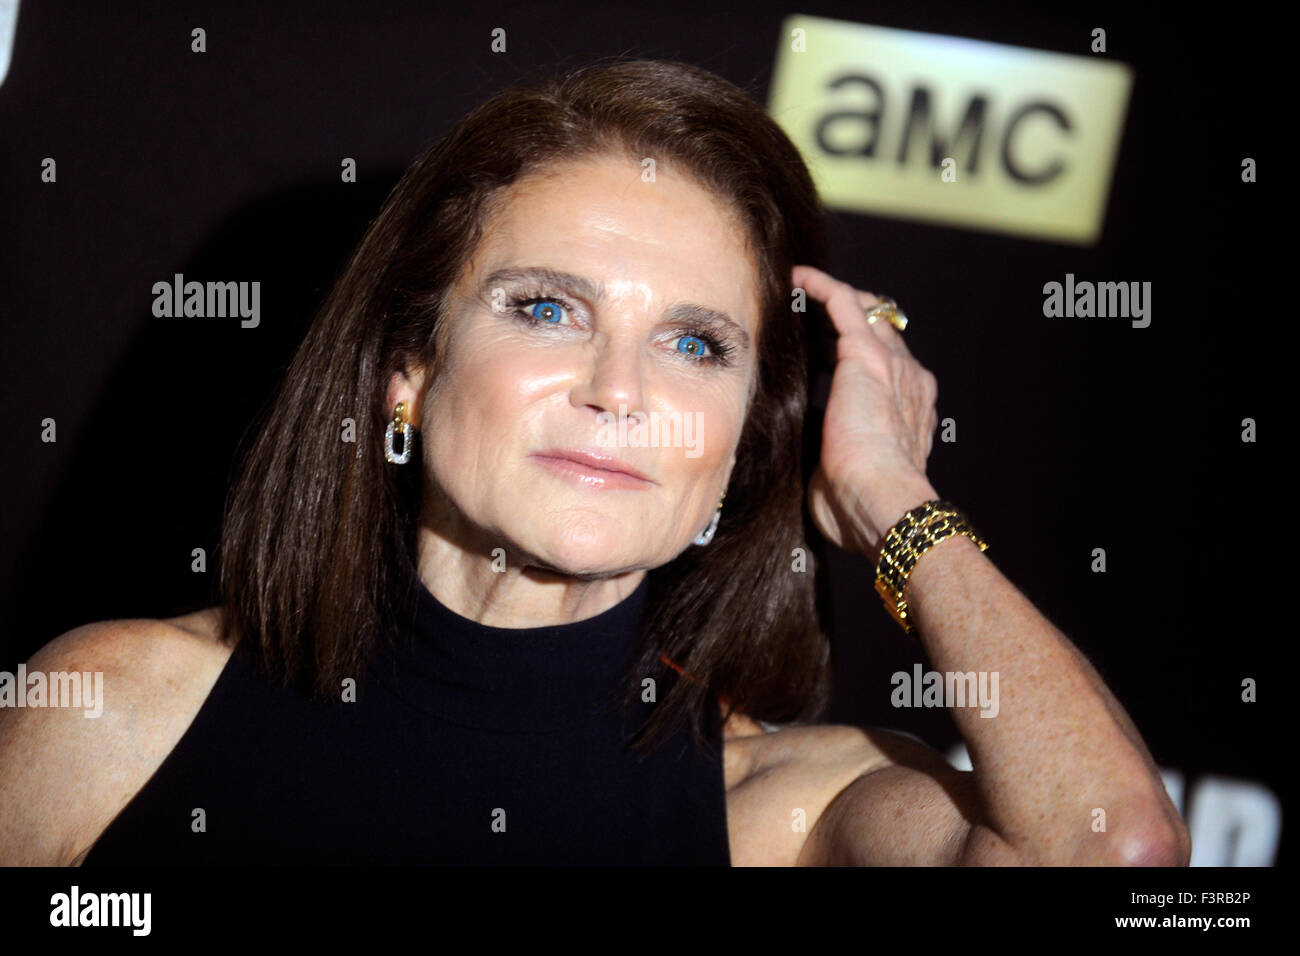 New York City. 9th Oct, 2015. Tovah Feldshuh attends AMC's 'The Walking Dead' Season 6 Fan Premiere Event 2015 at Madison Square Garden on October 9, 2015 in New York City./picture alliance © dpa/Alamy Live News Stock Photo